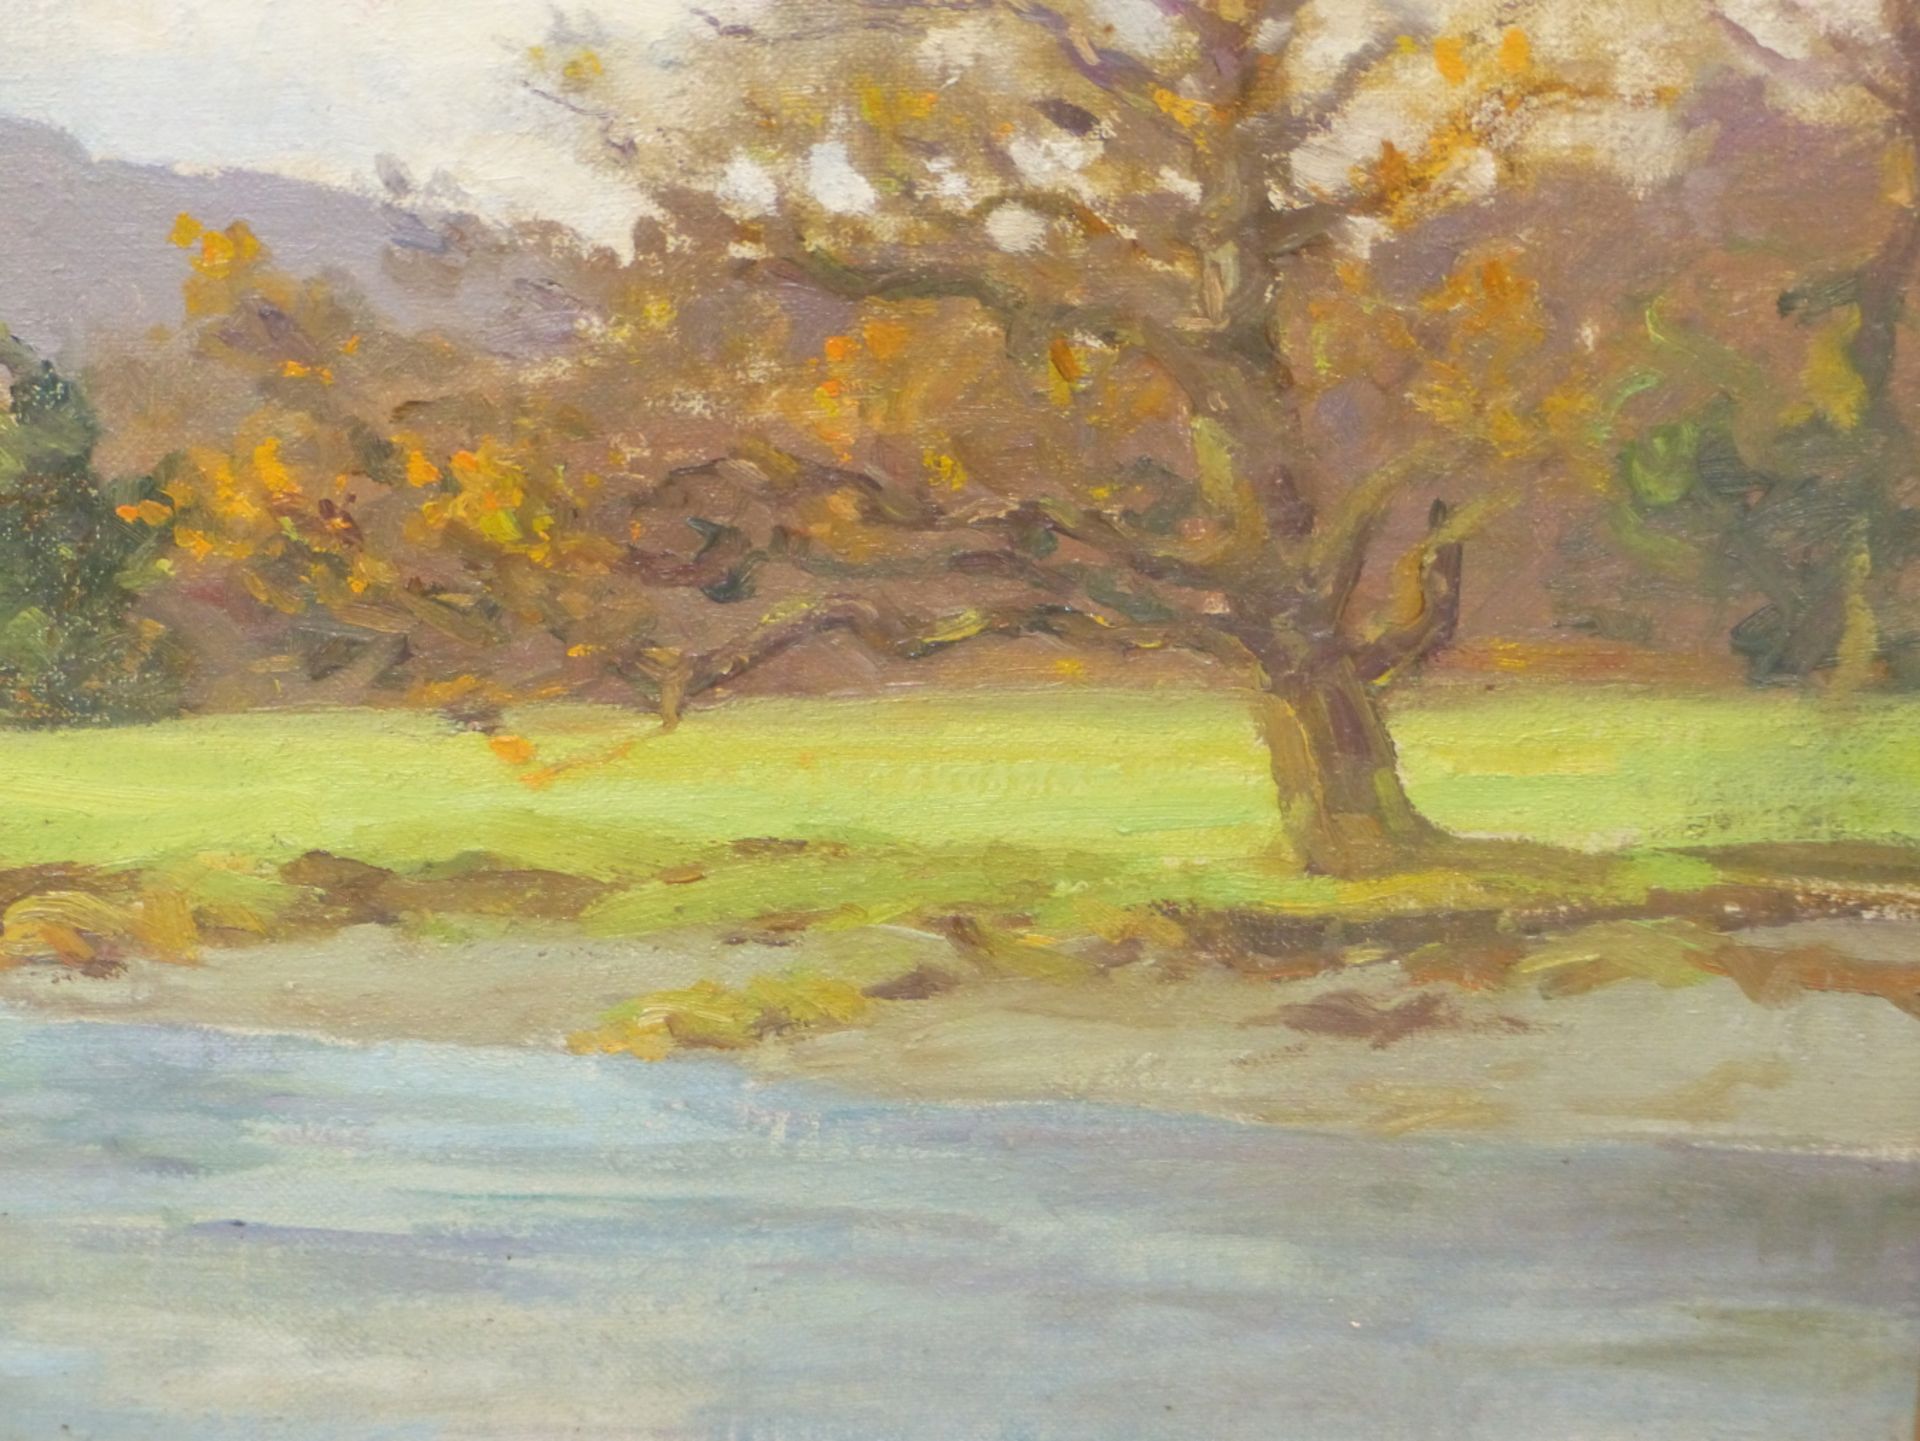 ROBERT JONES (EXH.1906-1940), LANDSCAPE AND TREES IN SUNLIGHT, SIGNED, OIL ON CANVAS, 49 X 28.5CM, - Image 3 of 5